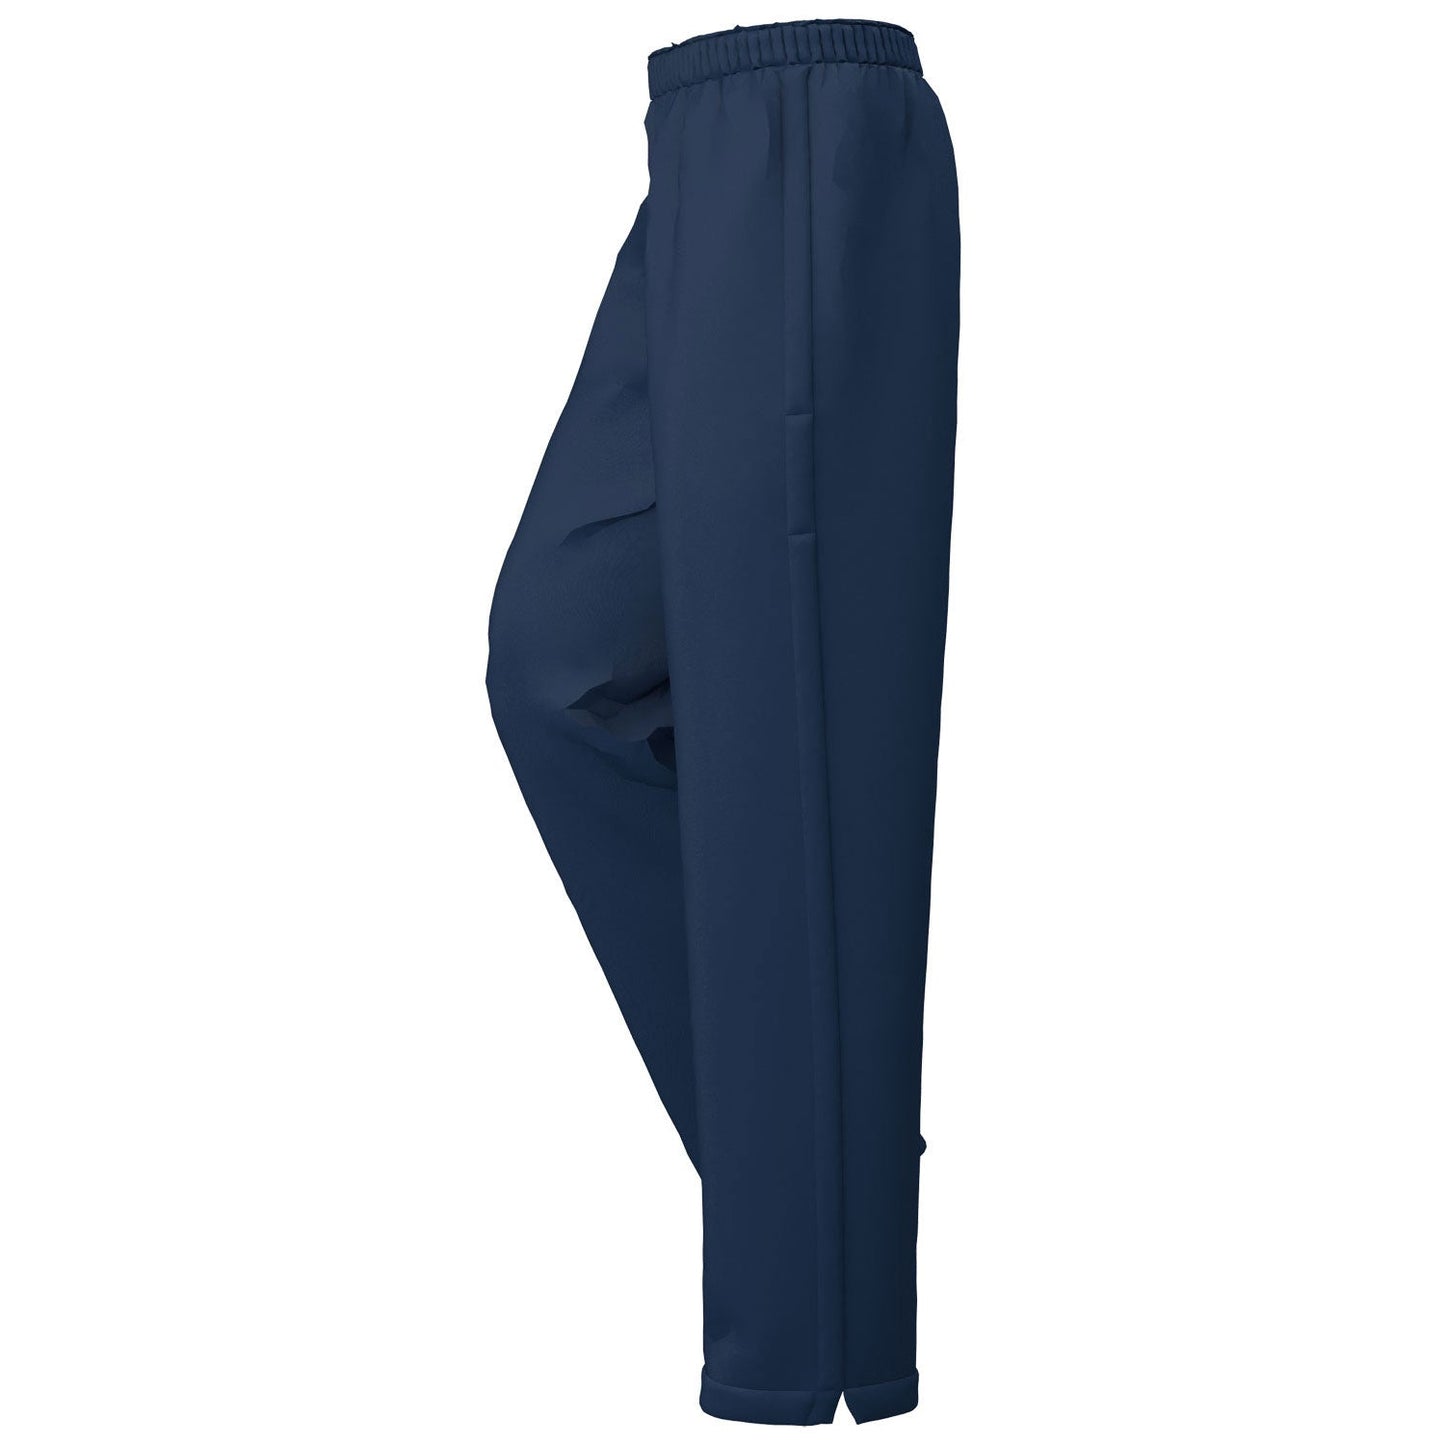 University College London Boat Club Standard Tracksuit Trousers